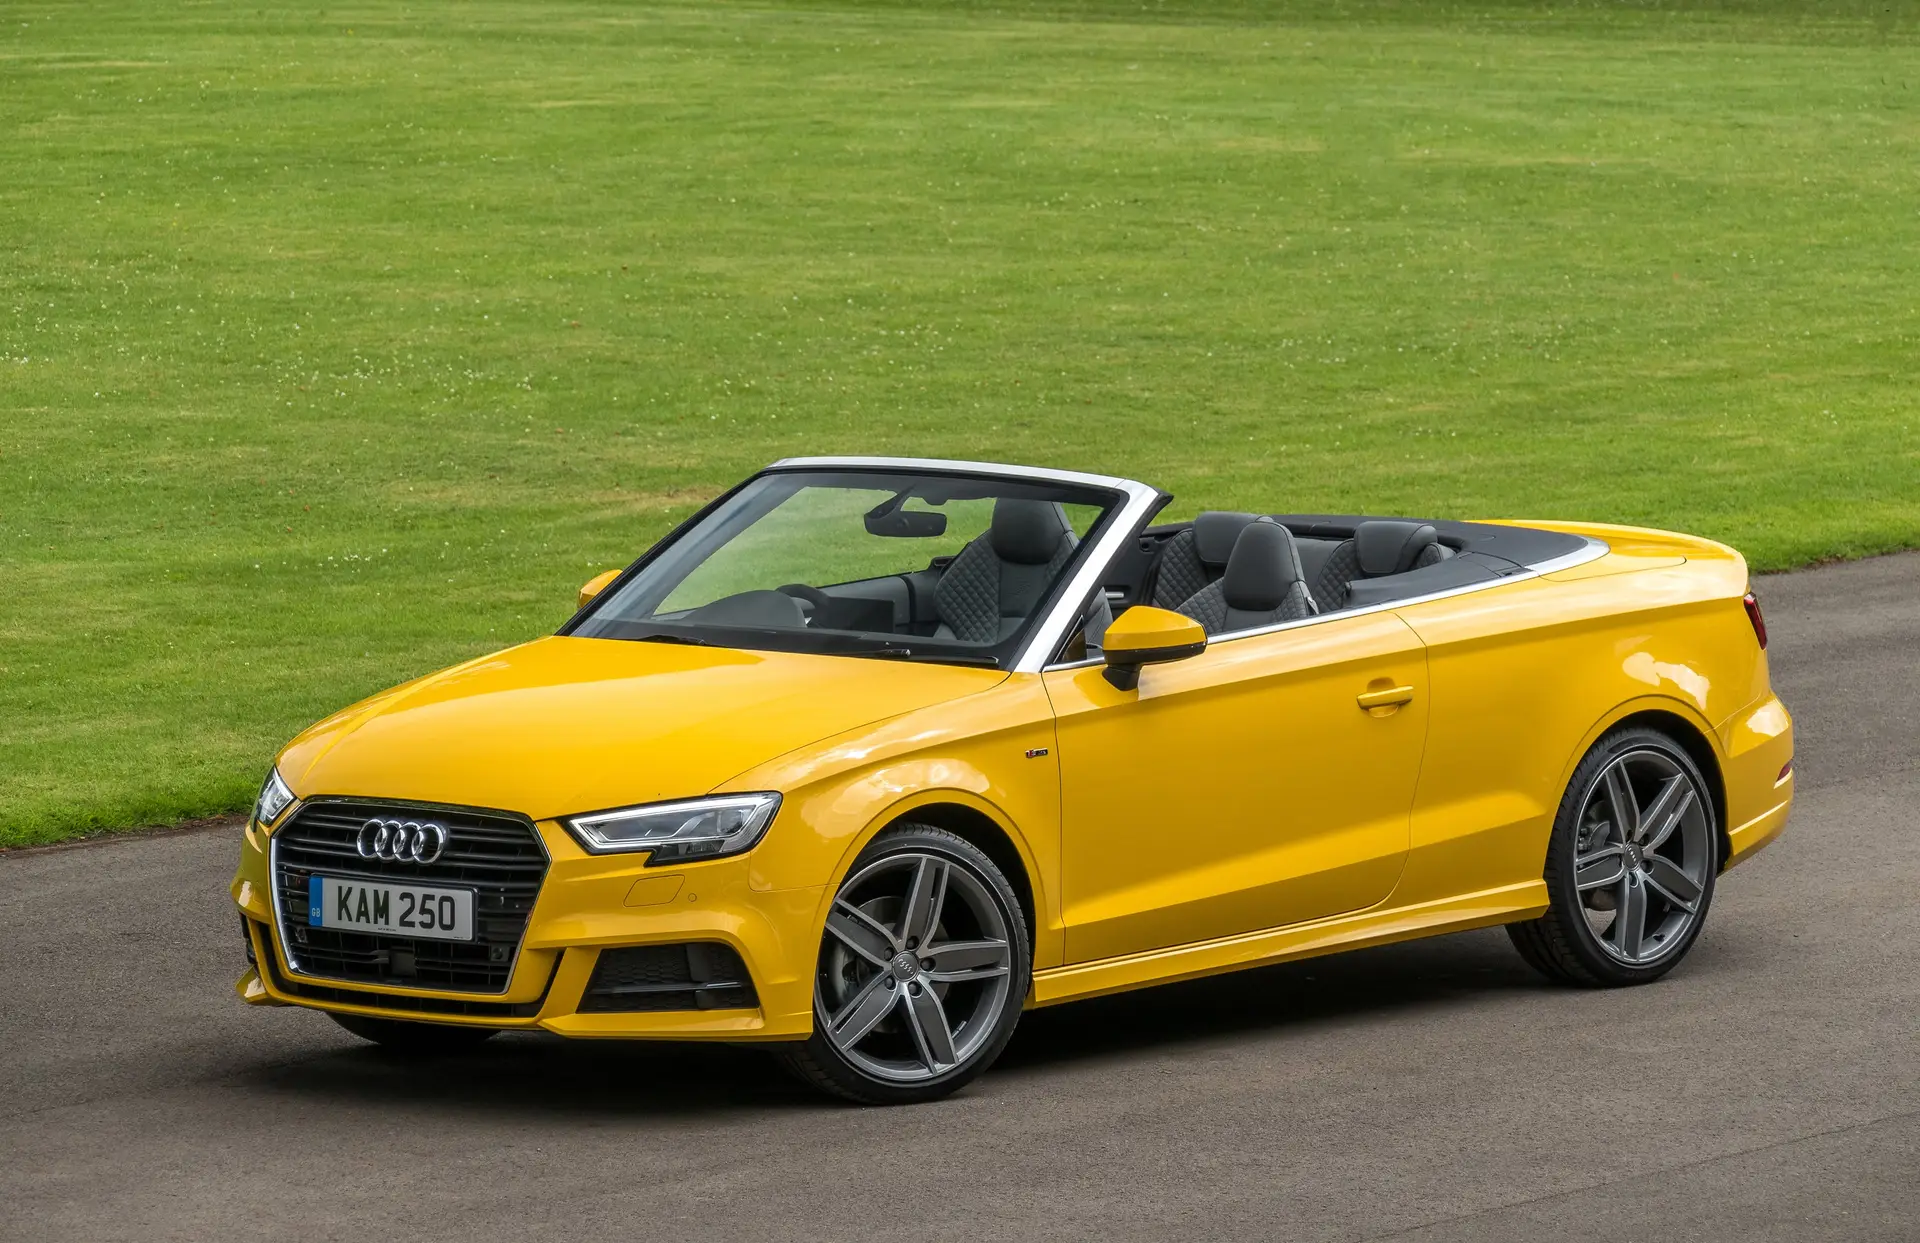  Audi A3 Cabriolet Review 2023: front three quarter exterior photo of the Audi A3 Cabriolet